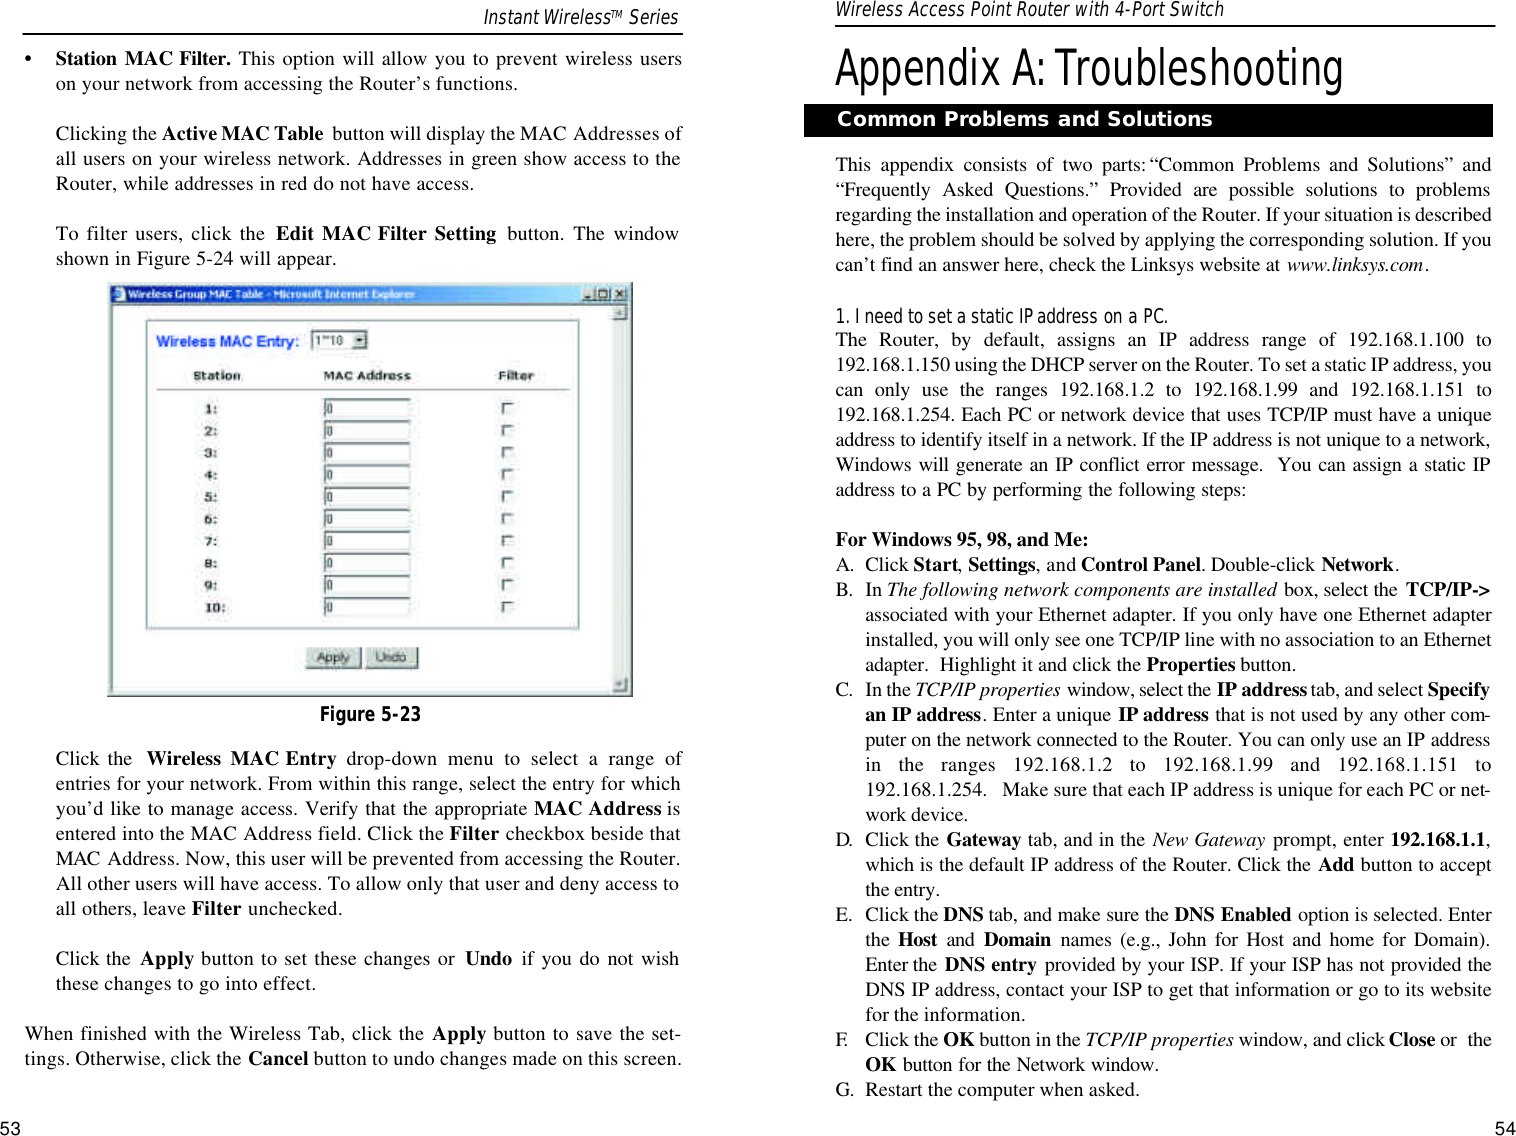 Appendix A:TroubleshootingThis appendix consists of two parts: “Common Problems and Solutions” and“Frequently Asked Questions.” Provided are possible solutions to problemsregarding the installation and operation of the Router. If your situation is describedhere, the problem should be solved by applying the corresponding solution. If youcan’t find an answer here, check the Linksys website at www.linksys.com.1. I need to set a static IPaddress on a PC.The Router, by default, assigns an IP address range of 192.168.1.100 to192.168.1.150 using the DHCP server on the Router. To set a static IP address, youcan only use the ranges 192.168.1.2 to 192.168.1.99 and 192.168.1.151 to192.168.1.254. Each PC or network device that uses TCP/IP must have a uniqueaddress to identify itself in a network. If the IP address is not unique to a network,Windows will generate an IP conflict error message.  You can assign a static IPaddress to a PC by performing the following steps:For Windows 95, 98, and Me:A. Click Start, Settings, and Control Panel. Double-click Network.B. In The following network components are installed box, select the  TCP/IP-&gt;associated with your Ethernet adapter. If you only have one Ethernet adapterinstalled, you will only see one TCP/IP line with no association to an Ethernetadapter.  Highlight it and click the Properties button.C. In the TCP/IP properties window, select the IP addresstab, and select Specifyan IP address. Enter a unique IP address that is not used by any other com-puter on the network connected to the Router. You can only use an IP addressin the ranges 192.168.1.2 to 192.168.1.99 and 192.168.1.151 to192.168.1.254.   Make sure that each IP address is unique for each PC or net-work device.D. Click the Gateway tab, and in the New Gateway prompt, enter 192.168.1.1,which is the default IP address of the Router. Click the Add button to acceptthe entry.E. Click the DNS tab, and make sure the DNS Enabled option is selected. Enterthe  Host and  Domain names (e.g., John for Host and home for Domain).Enter the  DNS entry provided by your ISP. If your ISP has not provided theDNS IP address, contact your ISP to get that information or go to its websitefor the information.F. Click the OK button in the TCP/IP properties window, and click Close or  theOK button for the Network window.G. Restart the computer when asked.53Common Problems and Solutions•Station MAC Filter. This option will allow you to prevent wireless userson your network from accessing the Router’s functions.Clicking the Active MAC Table  button will display the MAC Addresses ofall users on your wireless network. Addresses in green show access to theRouter, while addresses in red do not have access.To filter users, click the  Edit MAC Filter Setting button. The windowshown in Figure 5-24 will appear.Click the  Wireless MAC Entry drop-down menu to select a range ofentries for your network. From within this range, select the entry for whichyou’d like to manage access. Verify that the appropriate MAC Address isentered into the MAC Address field. Click the Filter checkbox beside thatMAC Address. Now, this user will be prevented from accessing the Router.All other users will have access. To allow only that user and deny access toall others, leave Filter unchecked.Click the  Apply button to set these changes or  Undo if you do not wishthese changes to go into effect.When finished with the Wireless Tab, click the Apply button to save the set-tings. Otherwise, click the Cancel button to undo changes made on this screen.Figure 5-23Instant WirelessTM Series Wireless Access Point Router with 4-Port Switch54